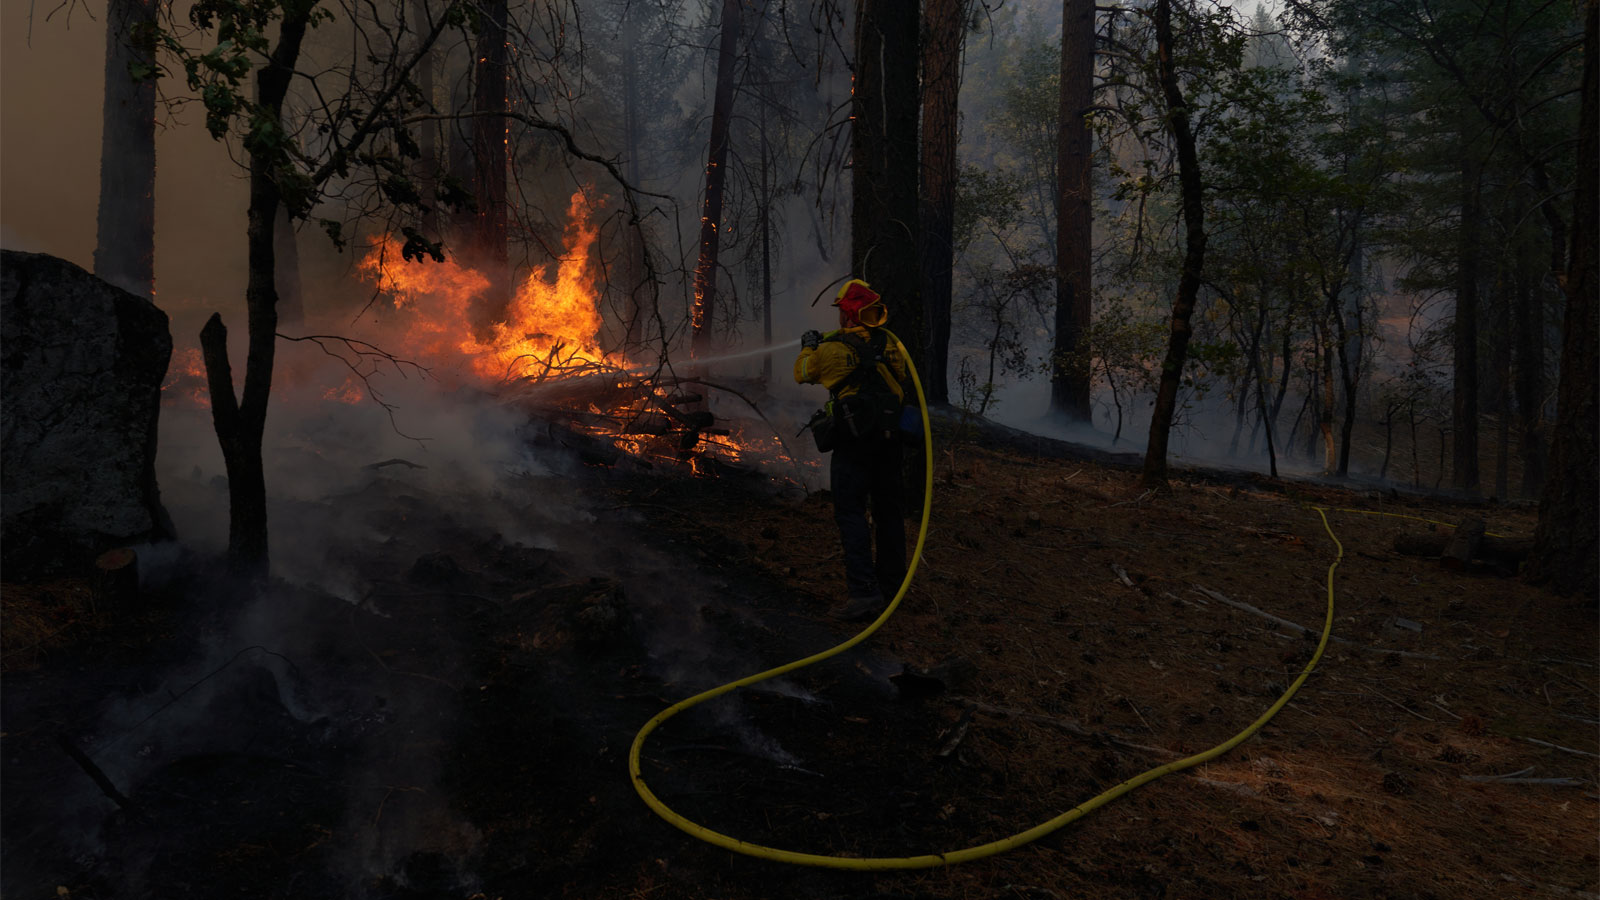 A firefighter spraying water on flames in a forest